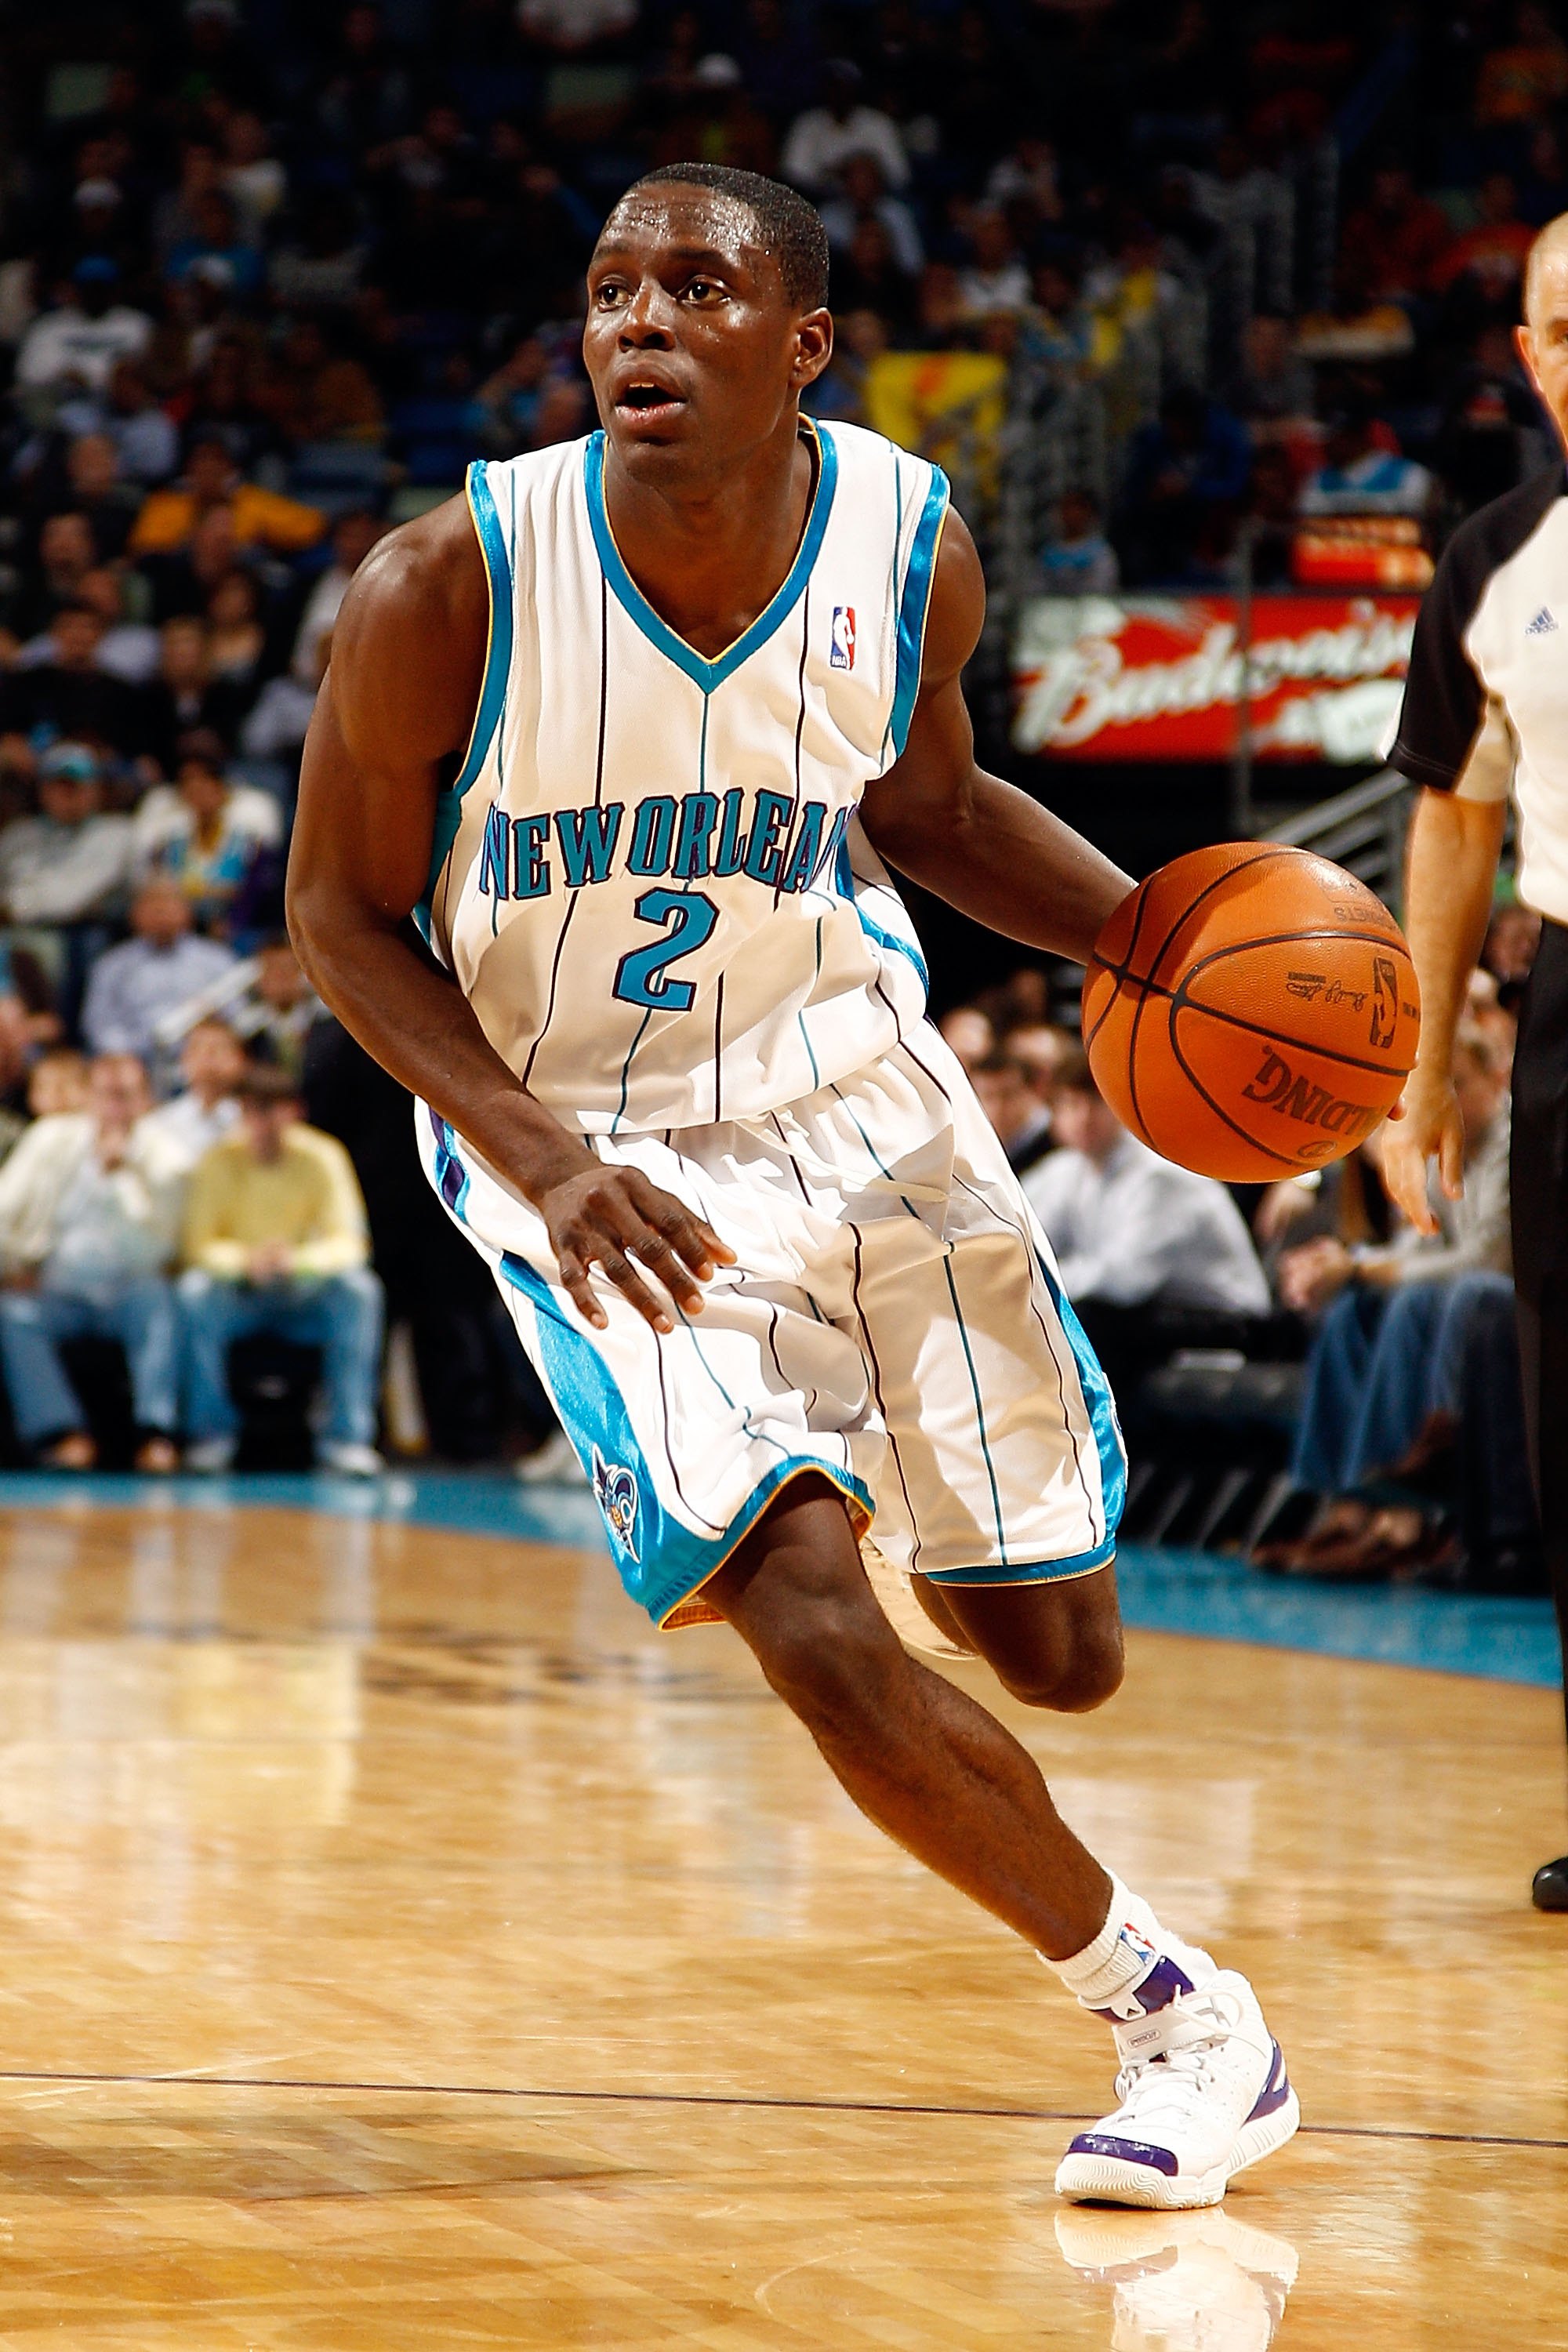 NEW ORLEANS - MARCH 22:  Darren Collison #2 of the New Orleans Hornets drives the ball during the game against the Dallas Mavericks at the New Orleans Arena on March 22, 2010 in New Orleans, Louisiana.  NOTE TO USER: User expressly acknowledges and agrees